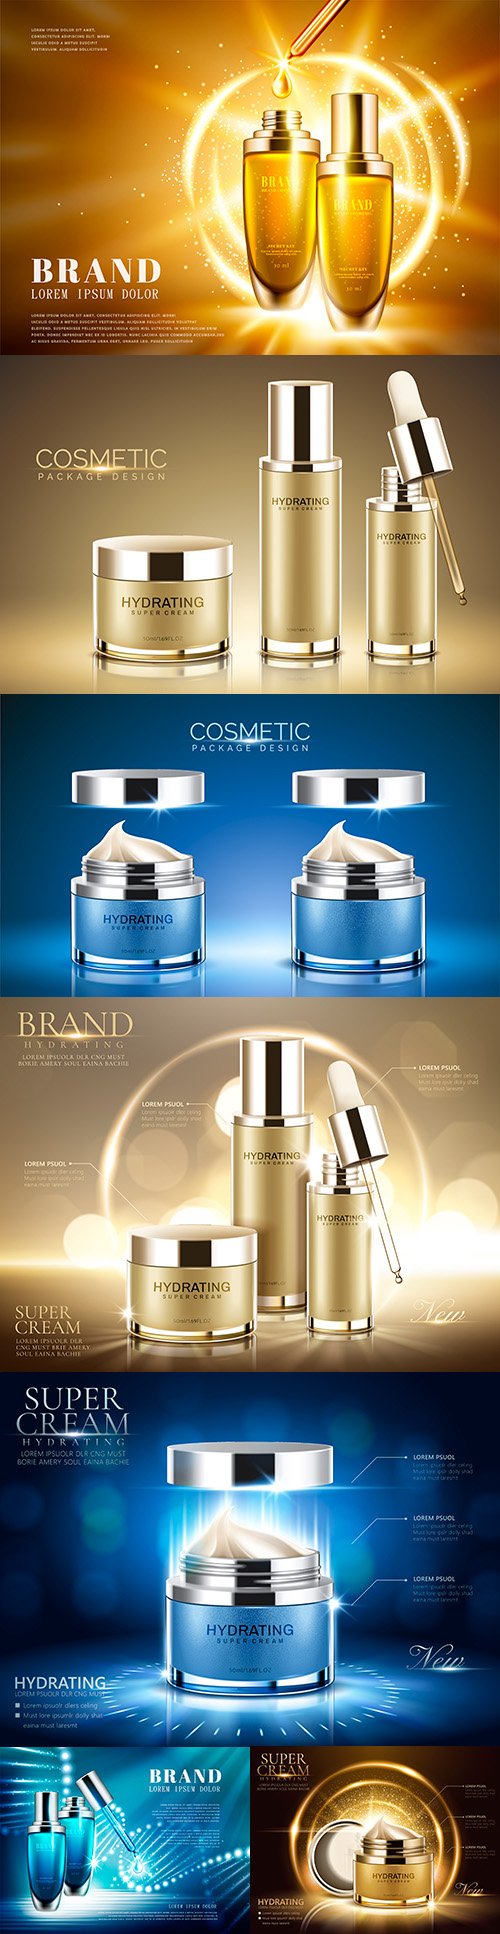 Advertising beauty products with sparkling lights illustration